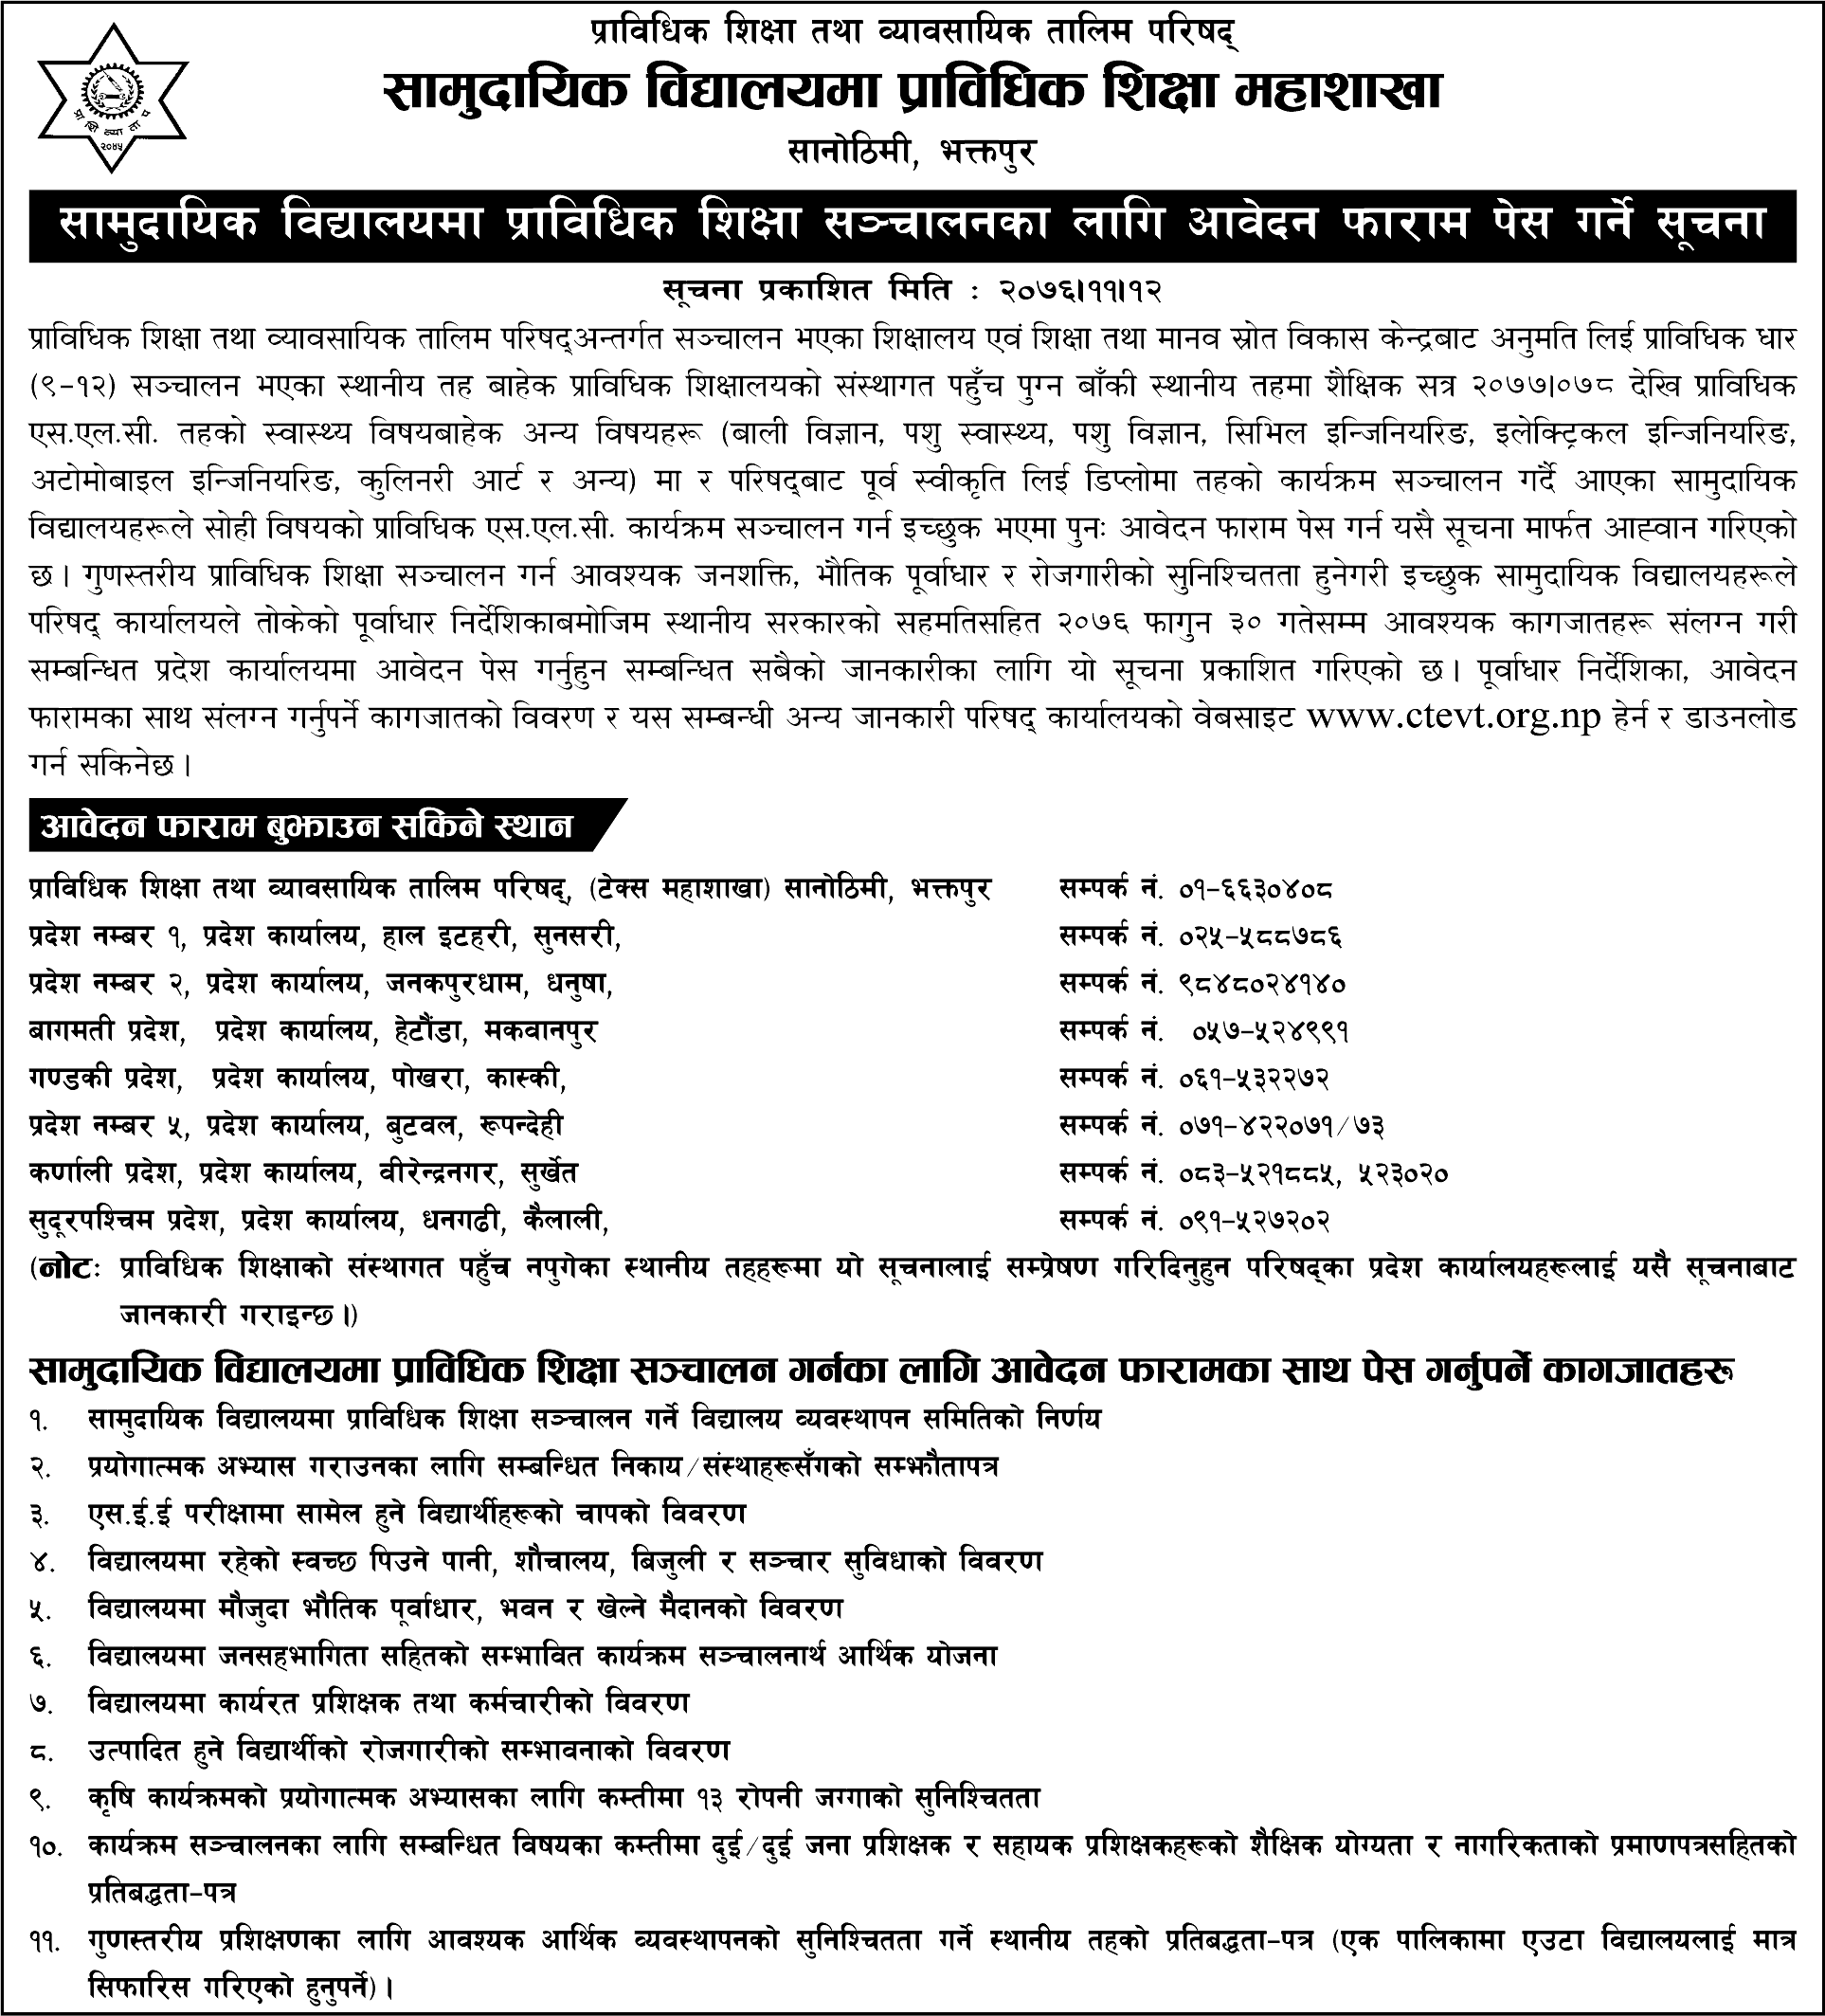 Application Request for Technical Education in Community Schools CTEVT